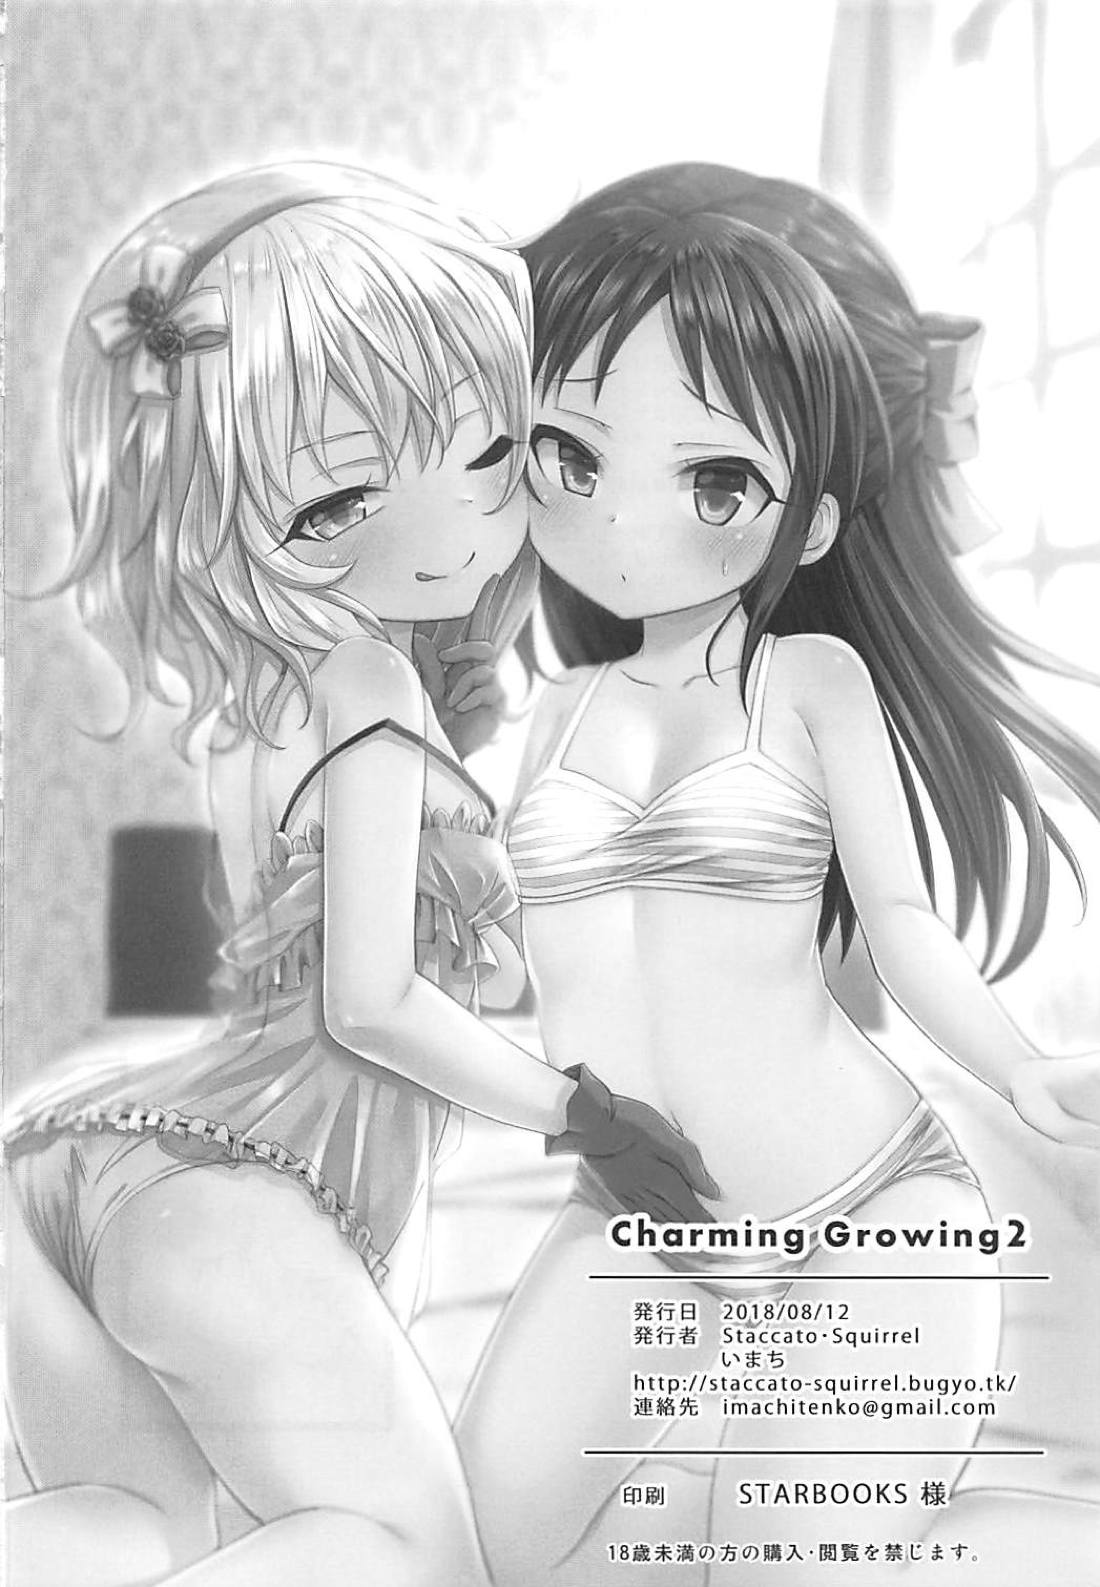 (C94) [Staccato・Squirrel (Imachi)] Charming Growing 2 (THE IDOLM@STER CINDERELLA GIRLS) page 25 full